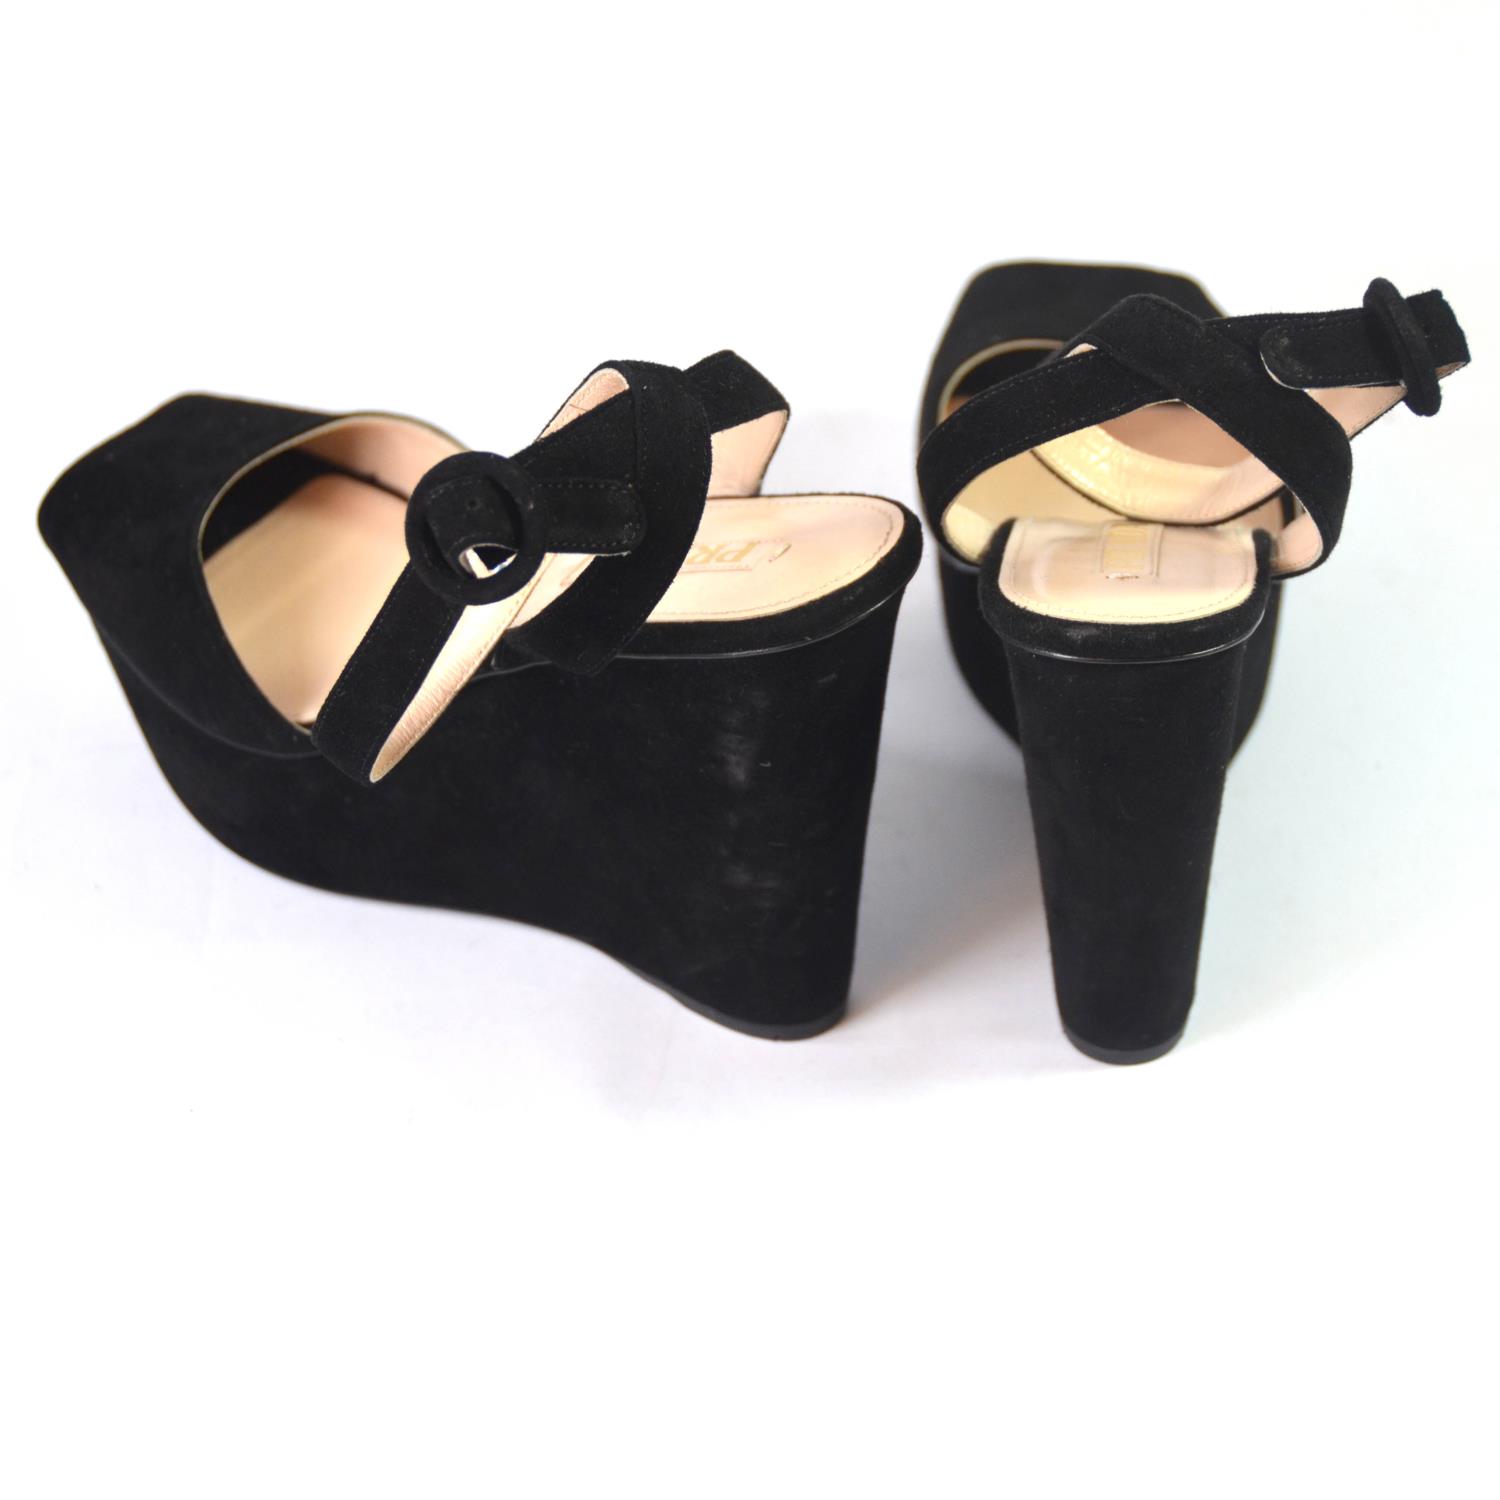 PRADA, BLACK SUEDE WEDGE HEELS With ankle strap with circle buckle, open toe (size 39). (heel 11. - Image 5 of 5